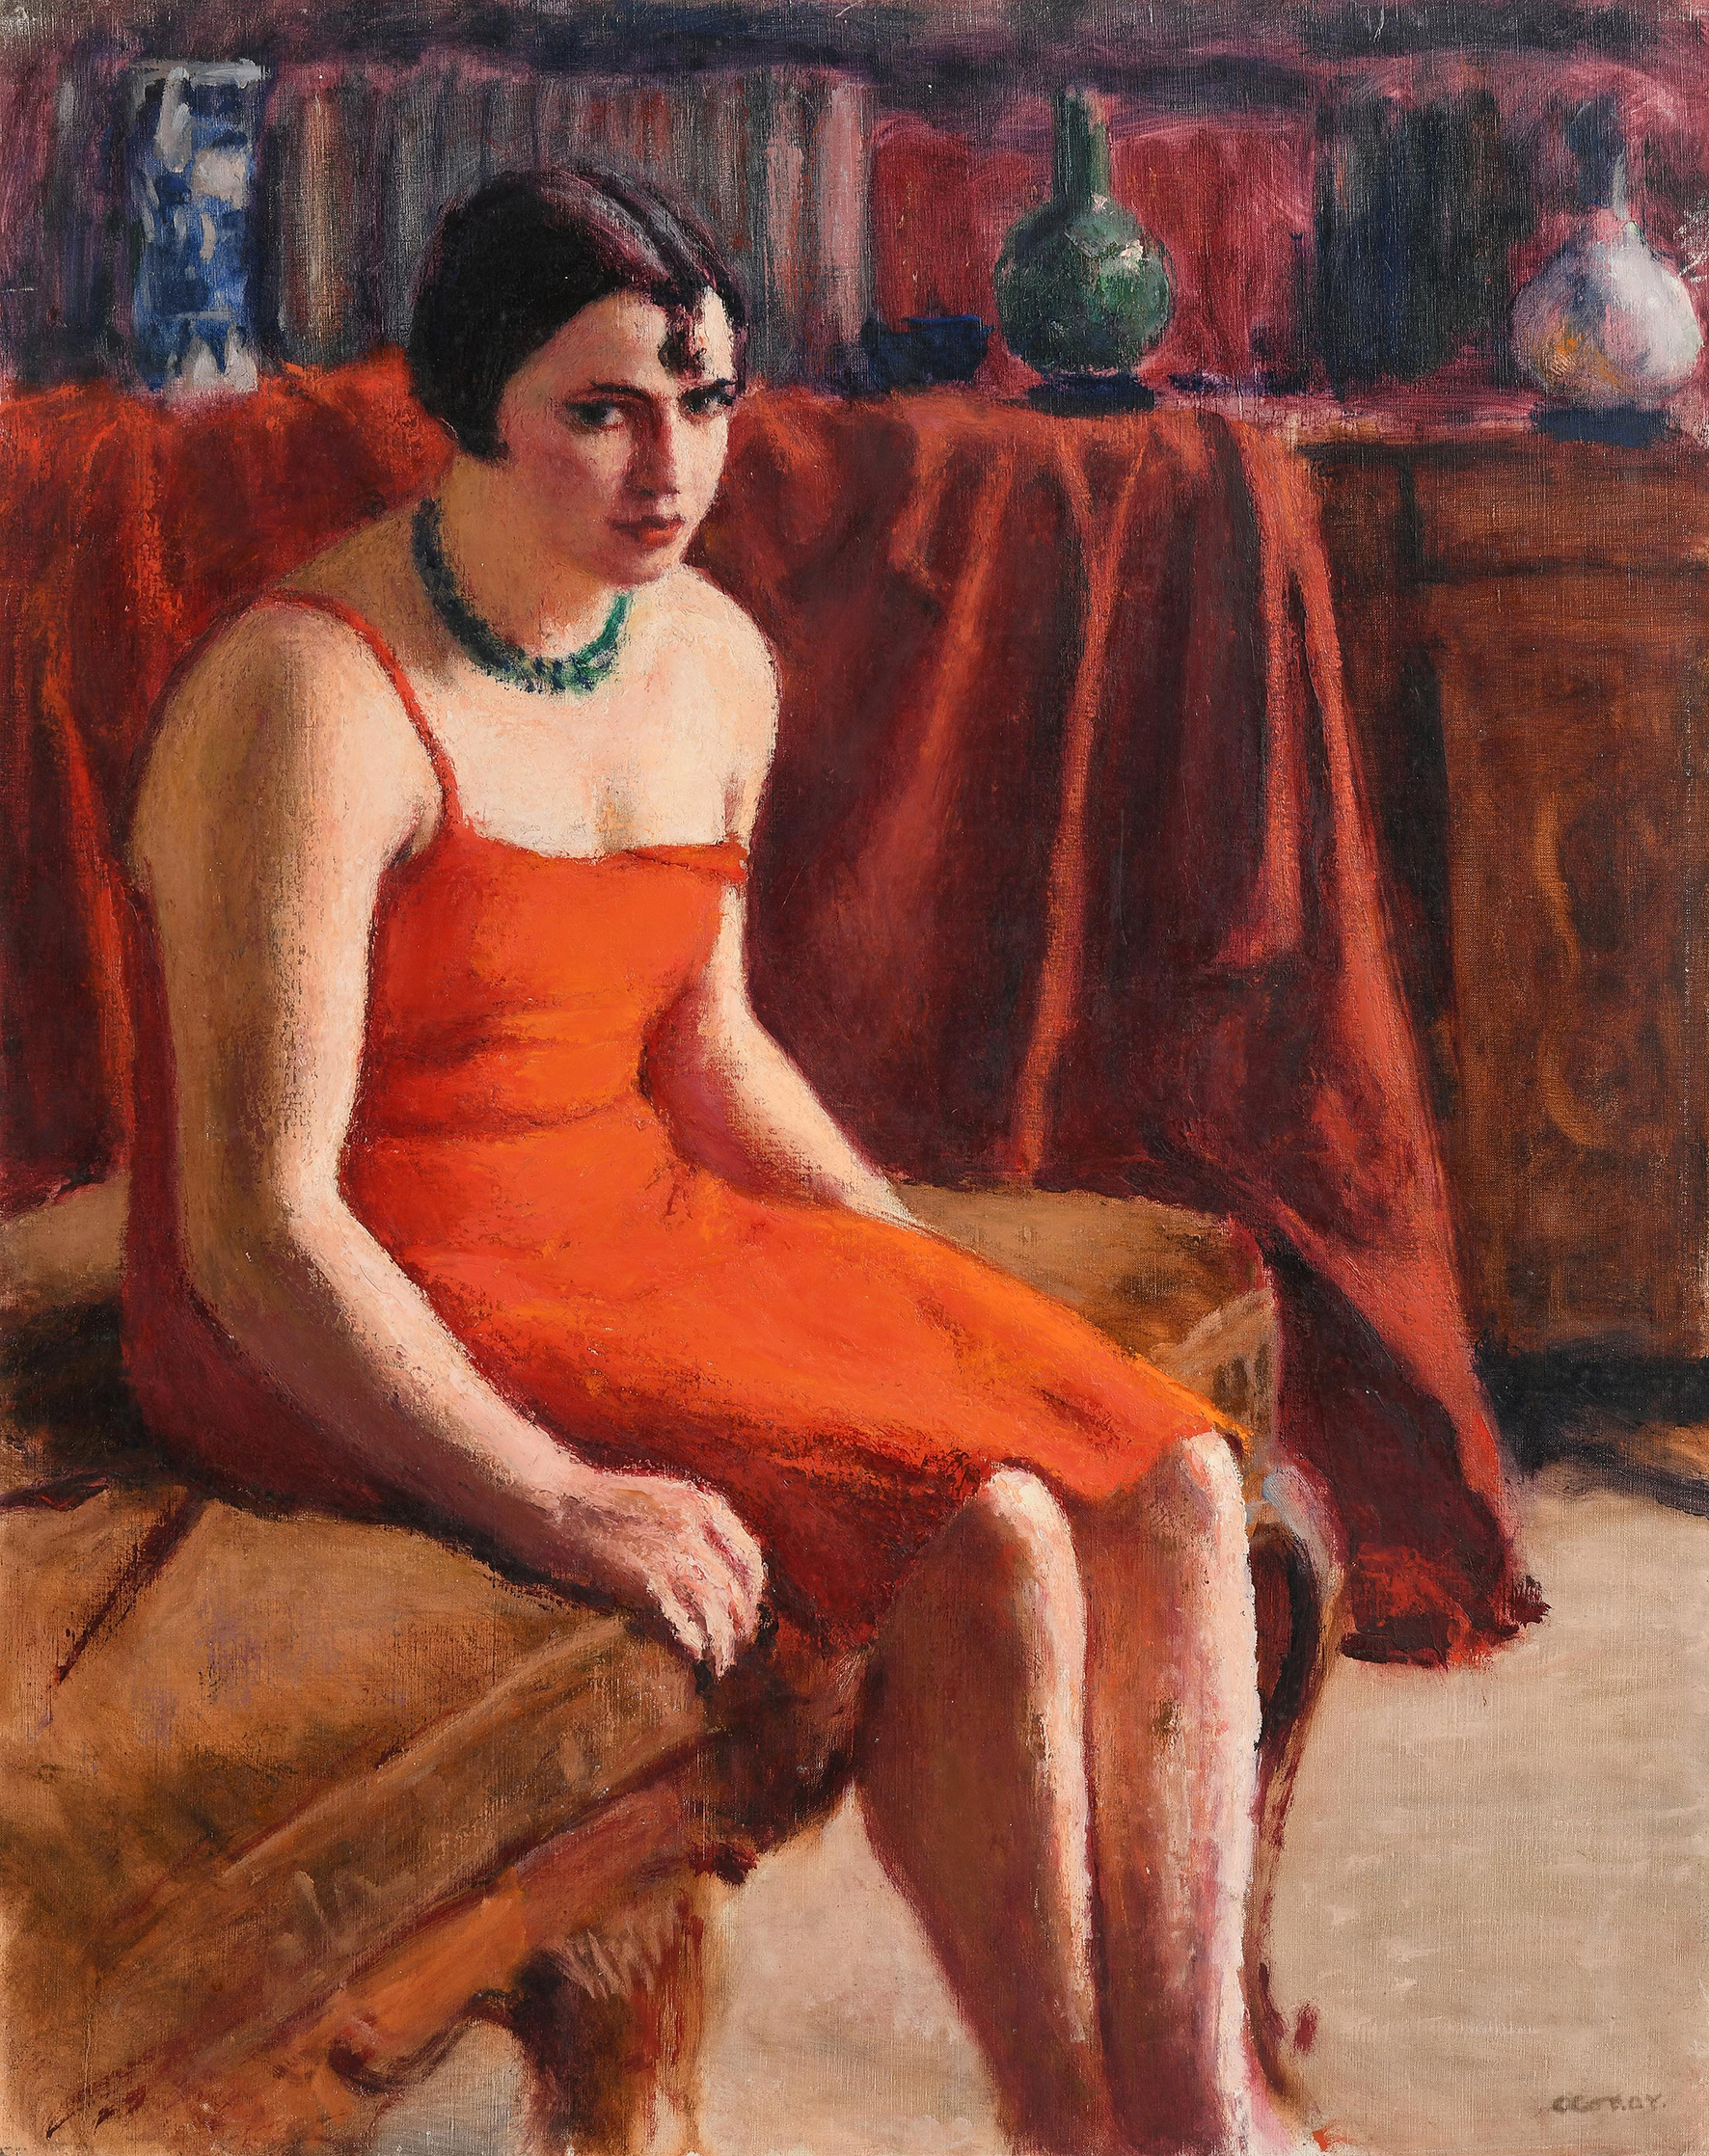 Seated Woman in a Red Dress / Le Divan c.1925